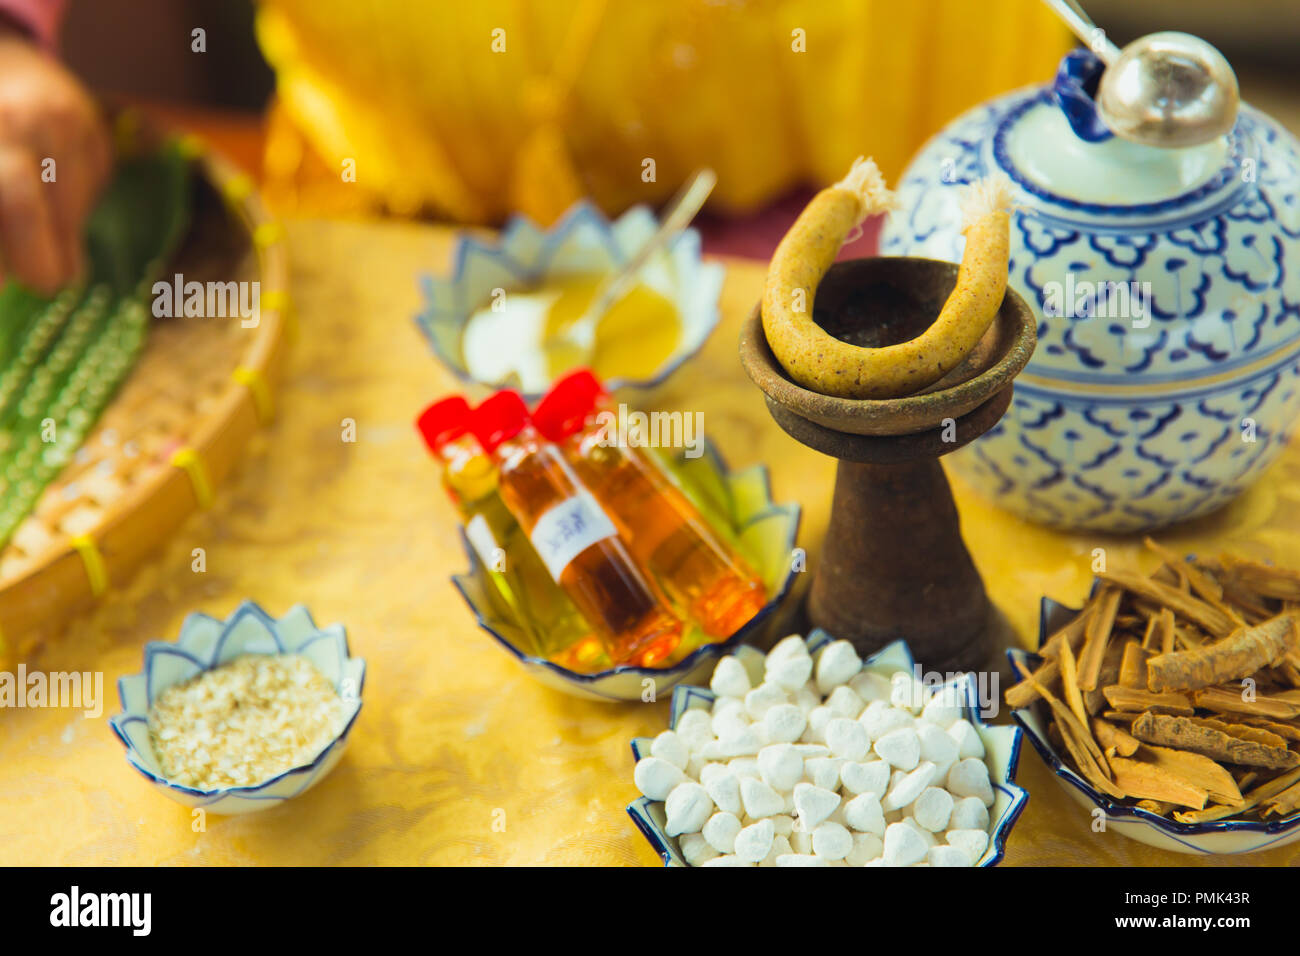 Thai traditional natural aroma scent for smoking food dessert menu vintage style. Stock Photo